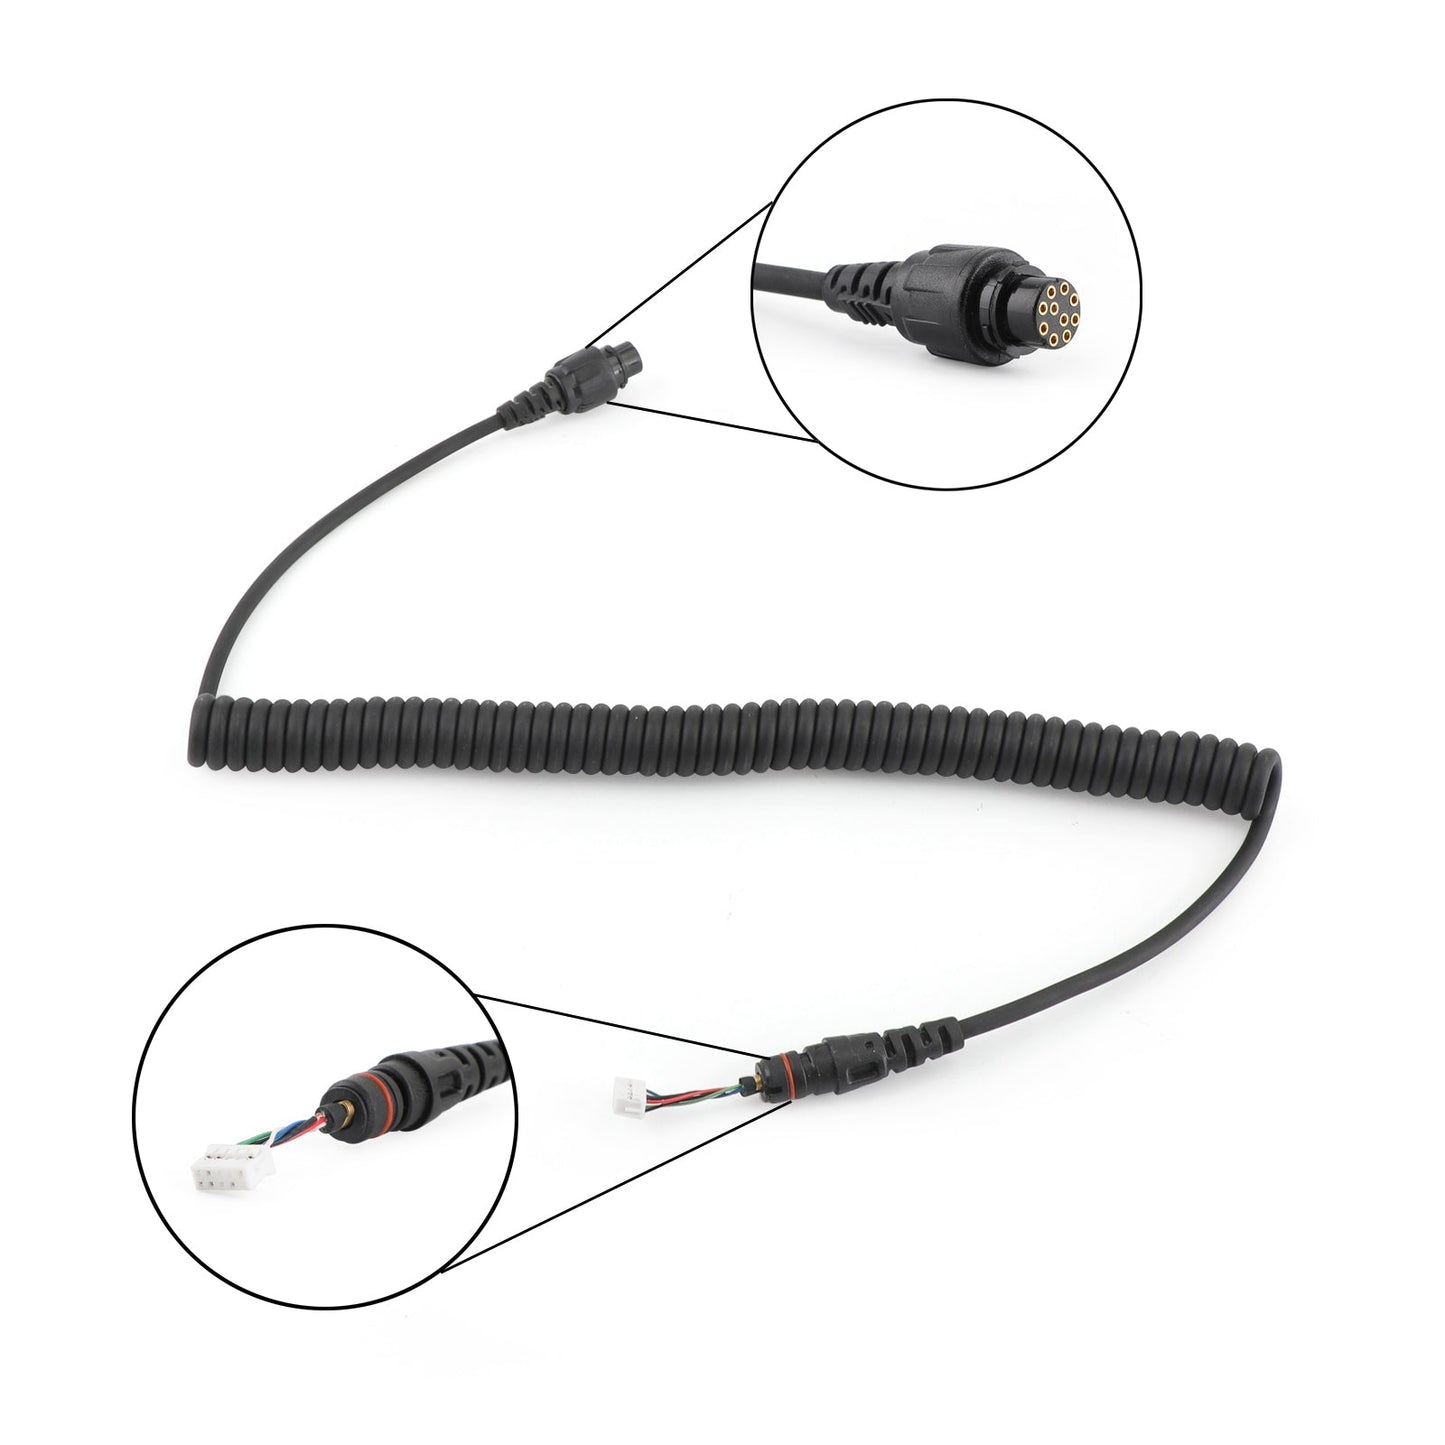 10 Pin Aviation Speaker Mic Cable Fit for Hytera MD780/G MD782U RD982U RD980